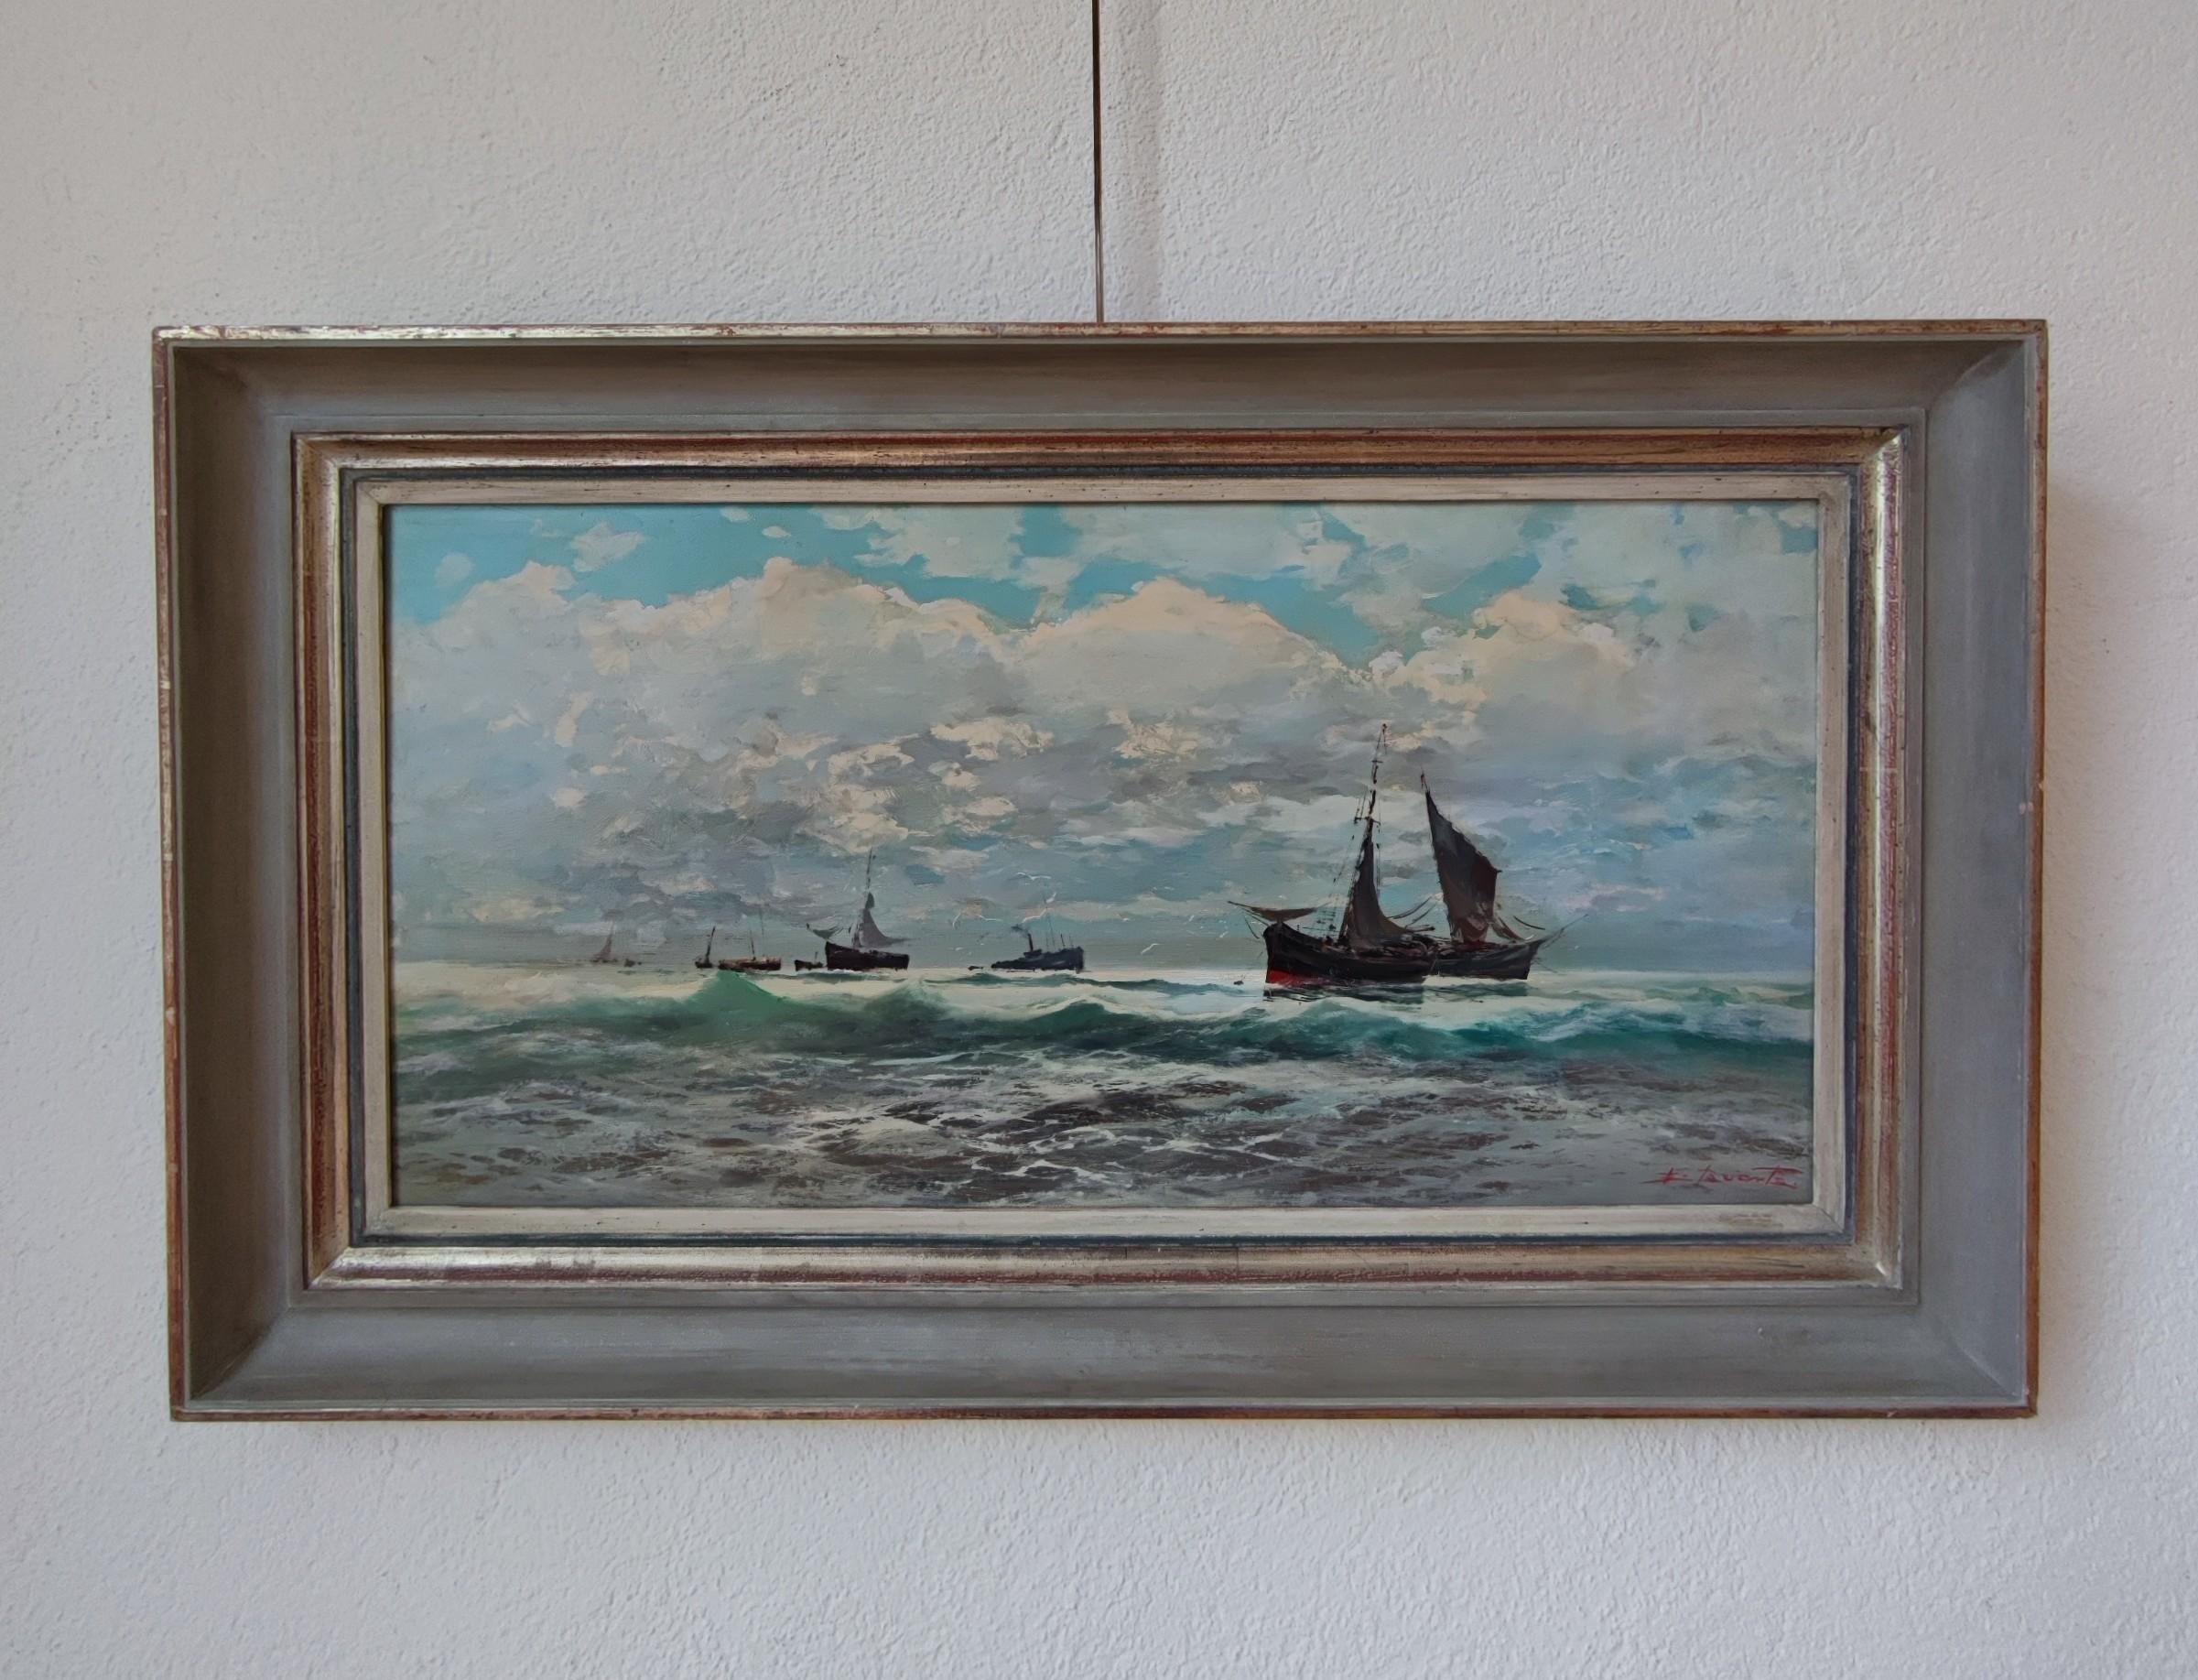 Boats at sea - Painting by Ezelino Briante